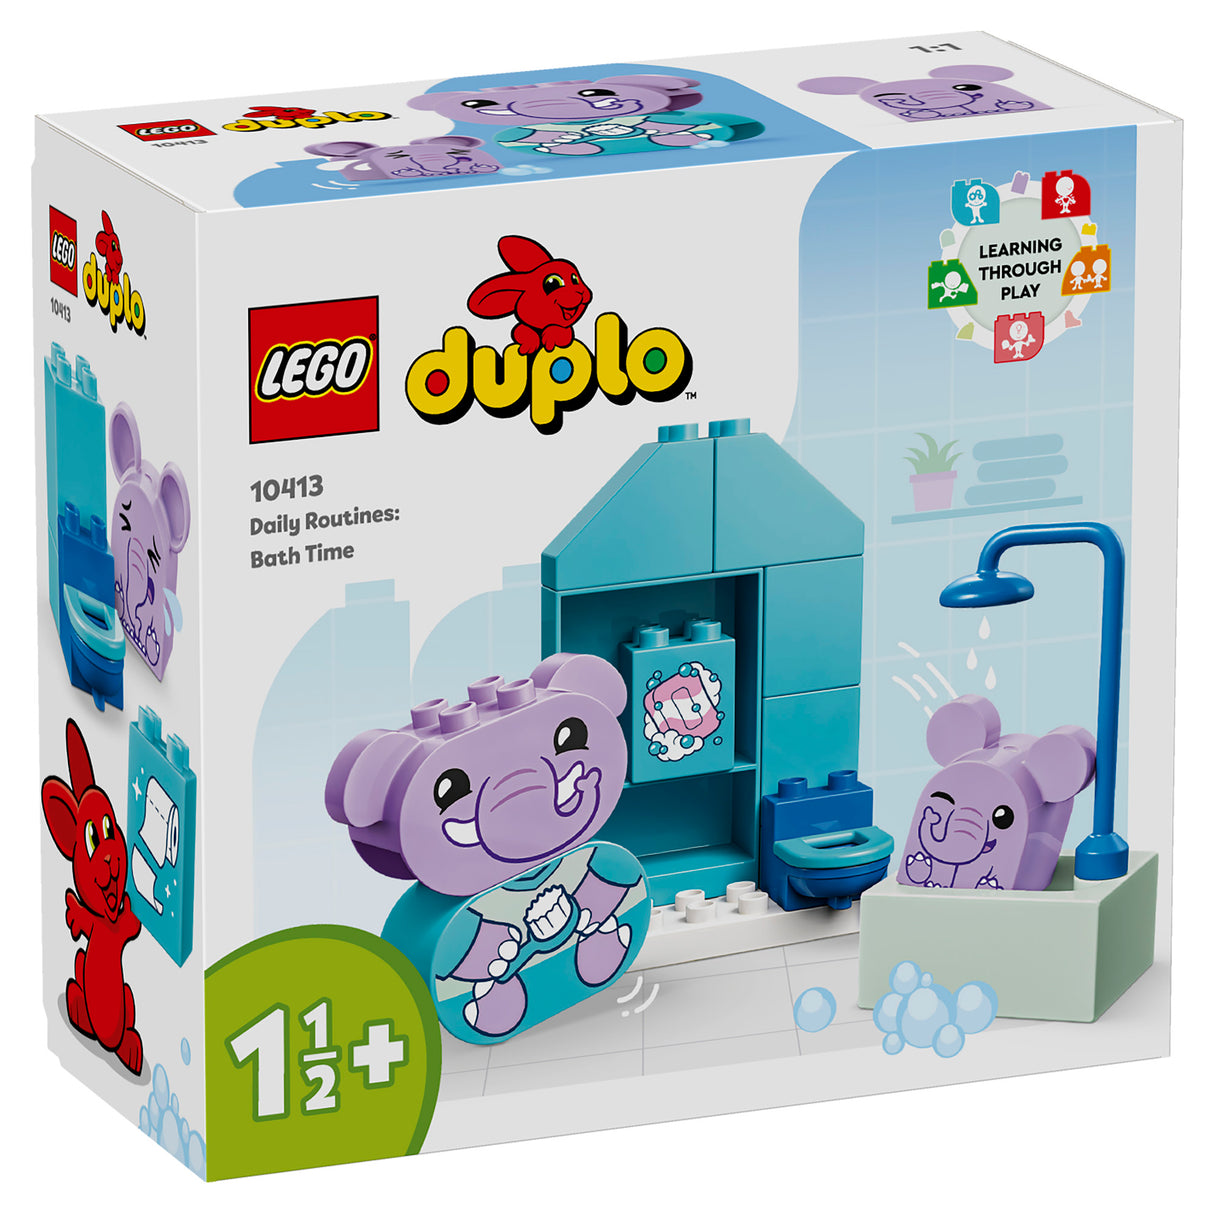 LEGO Duplo Daily Routines Bath Time 10413, (15-pieces)